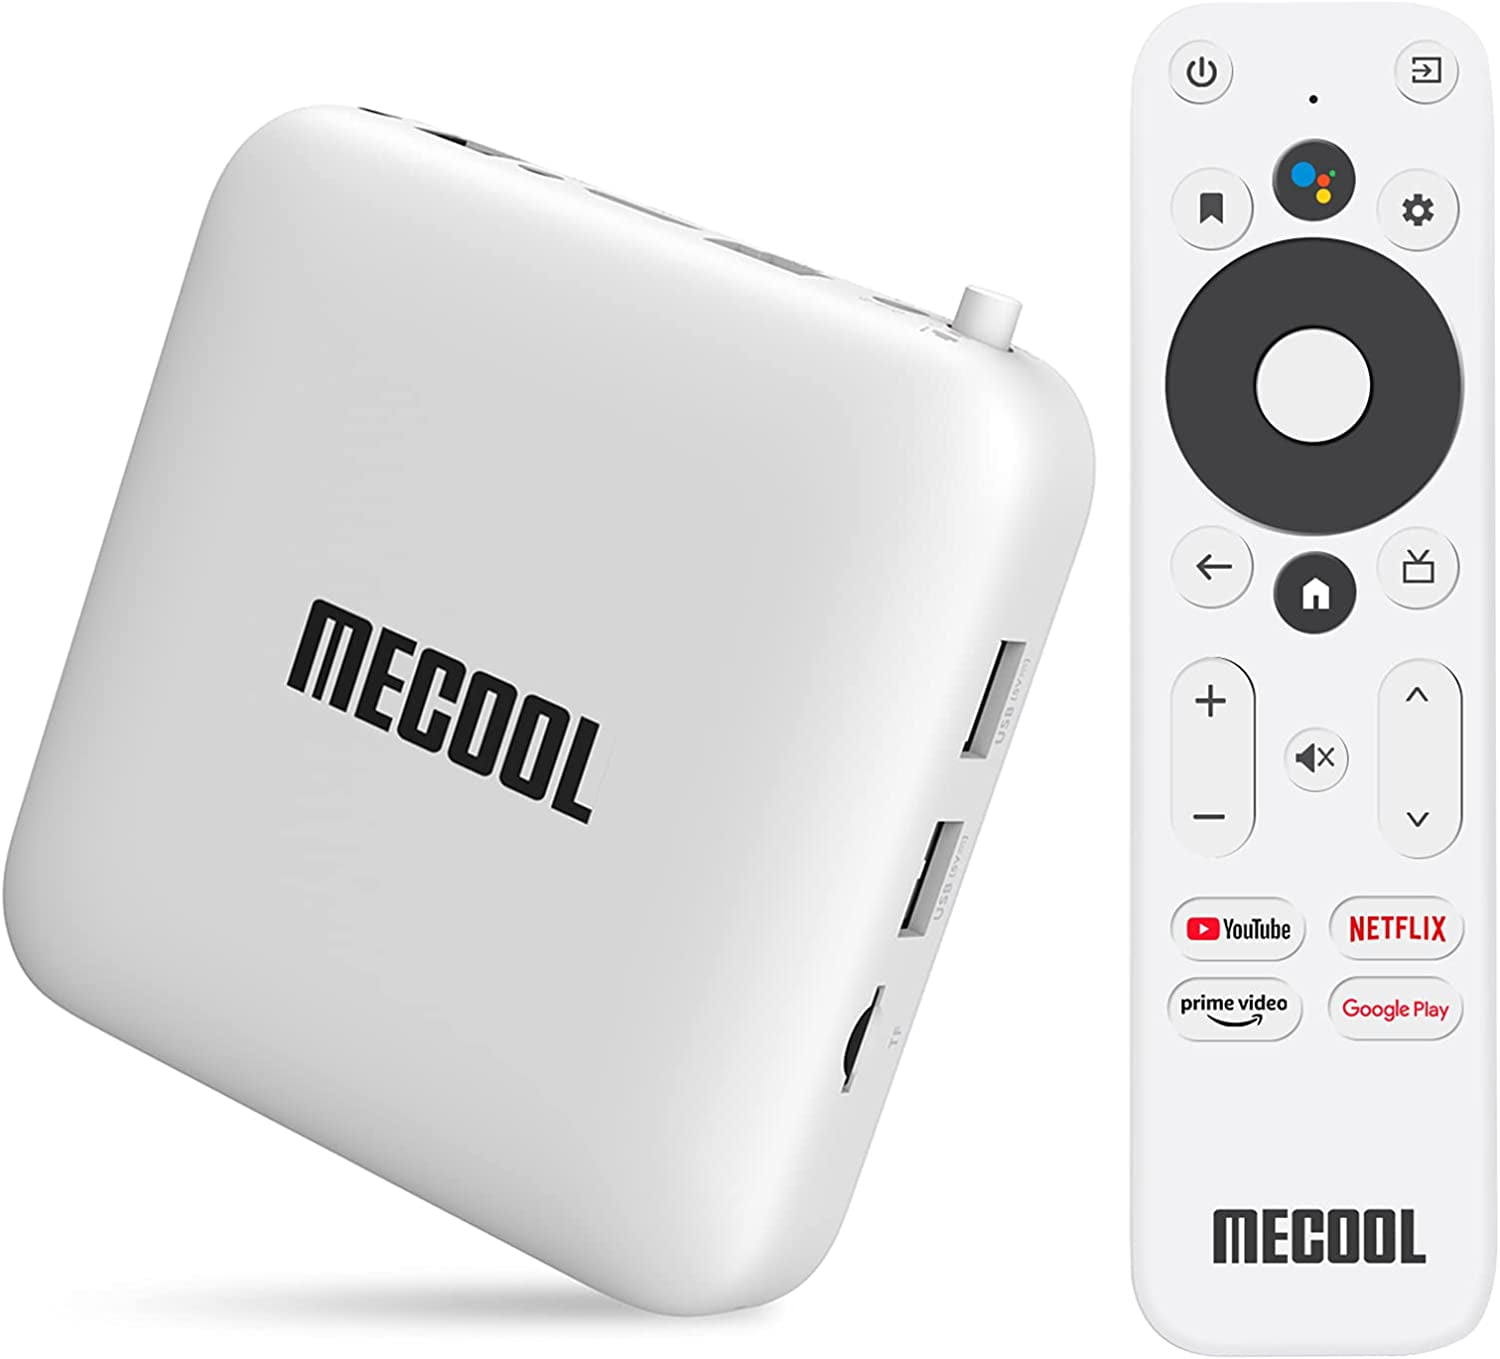 Mecool KM2 Plus: An affordable 4K TV box with great features